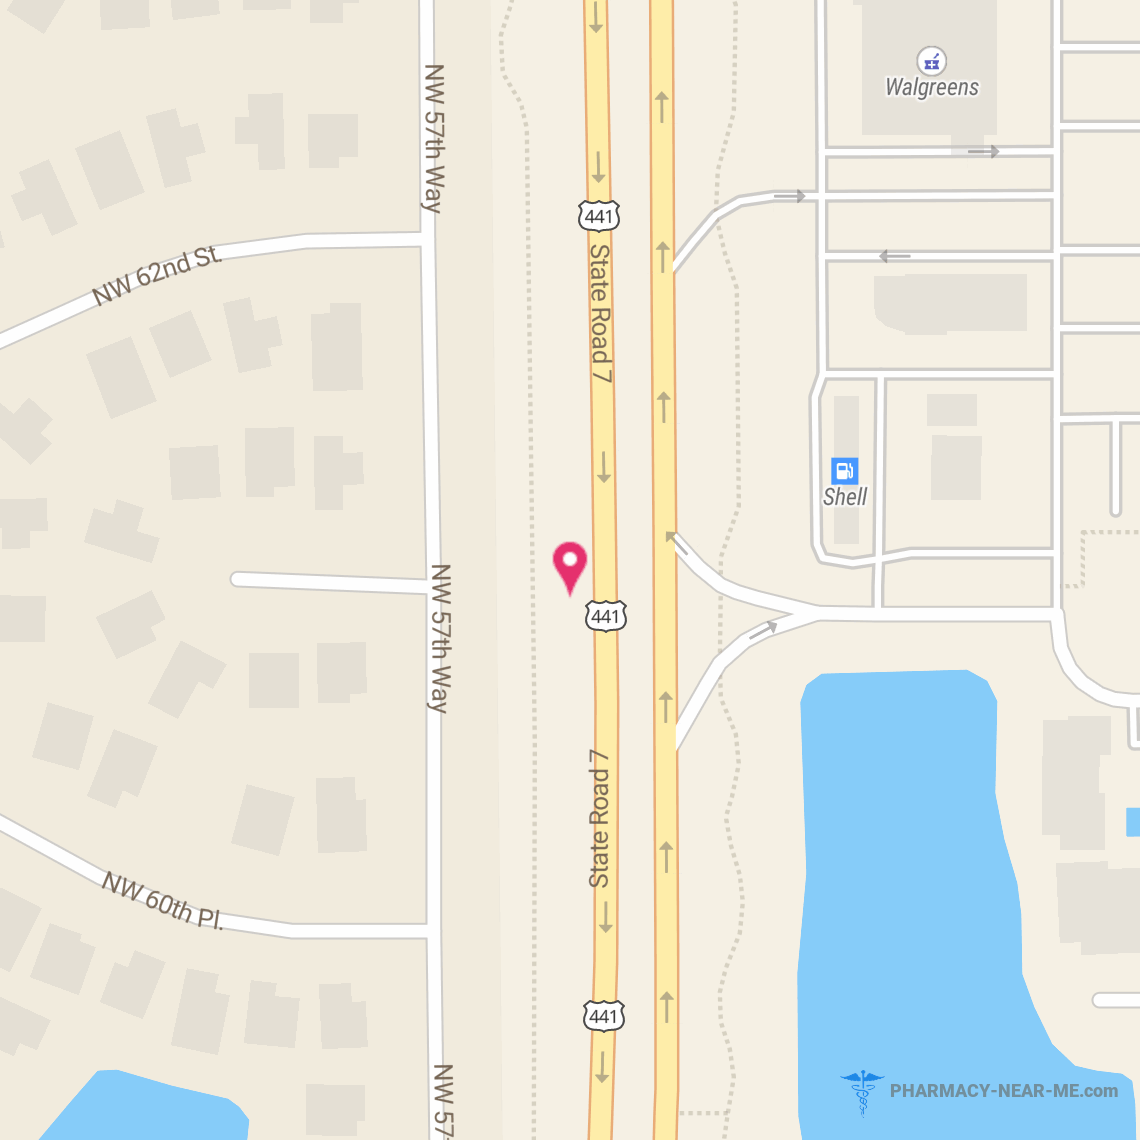 WALGREENS #04693 - Pharmacy Hours, Phone, Reviews & Information: 6015 State Hwy 7, Coconut Creek, FL 33073